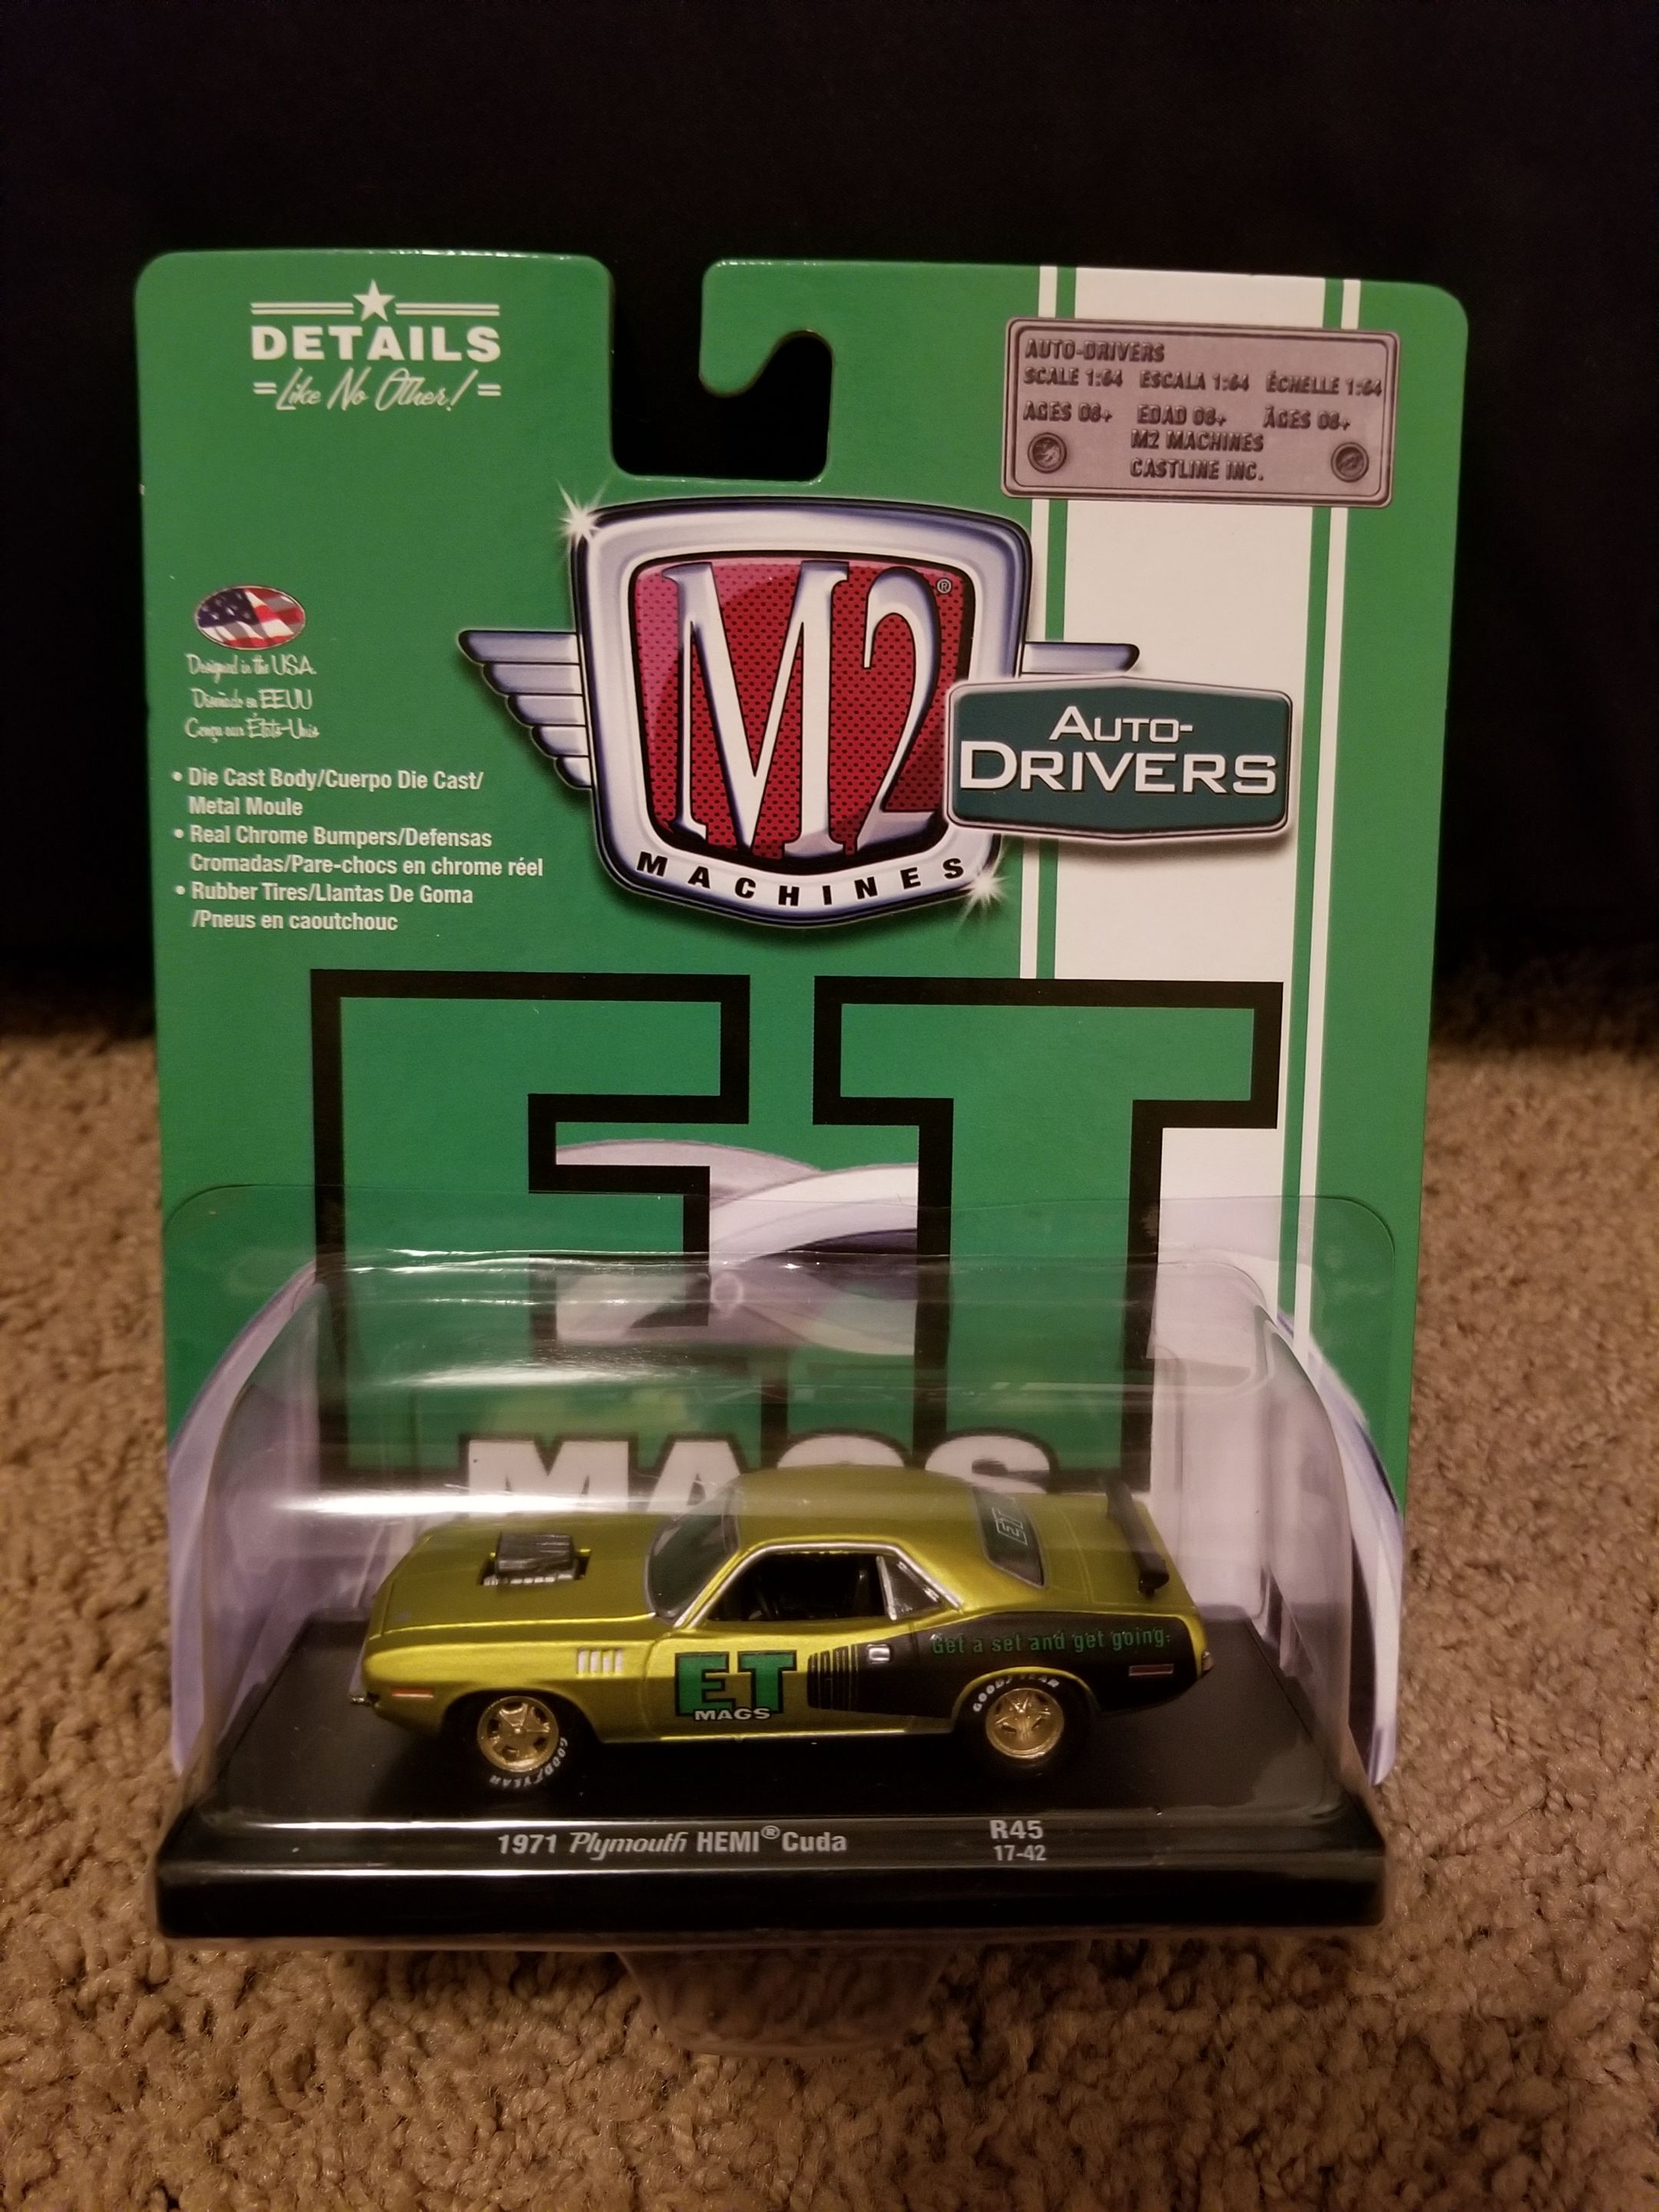 M2 MACHINES AUTO-DRIVERS CHASE ET MAGS 1971 PLYMOUTH HEMI CUDA R45 1:64